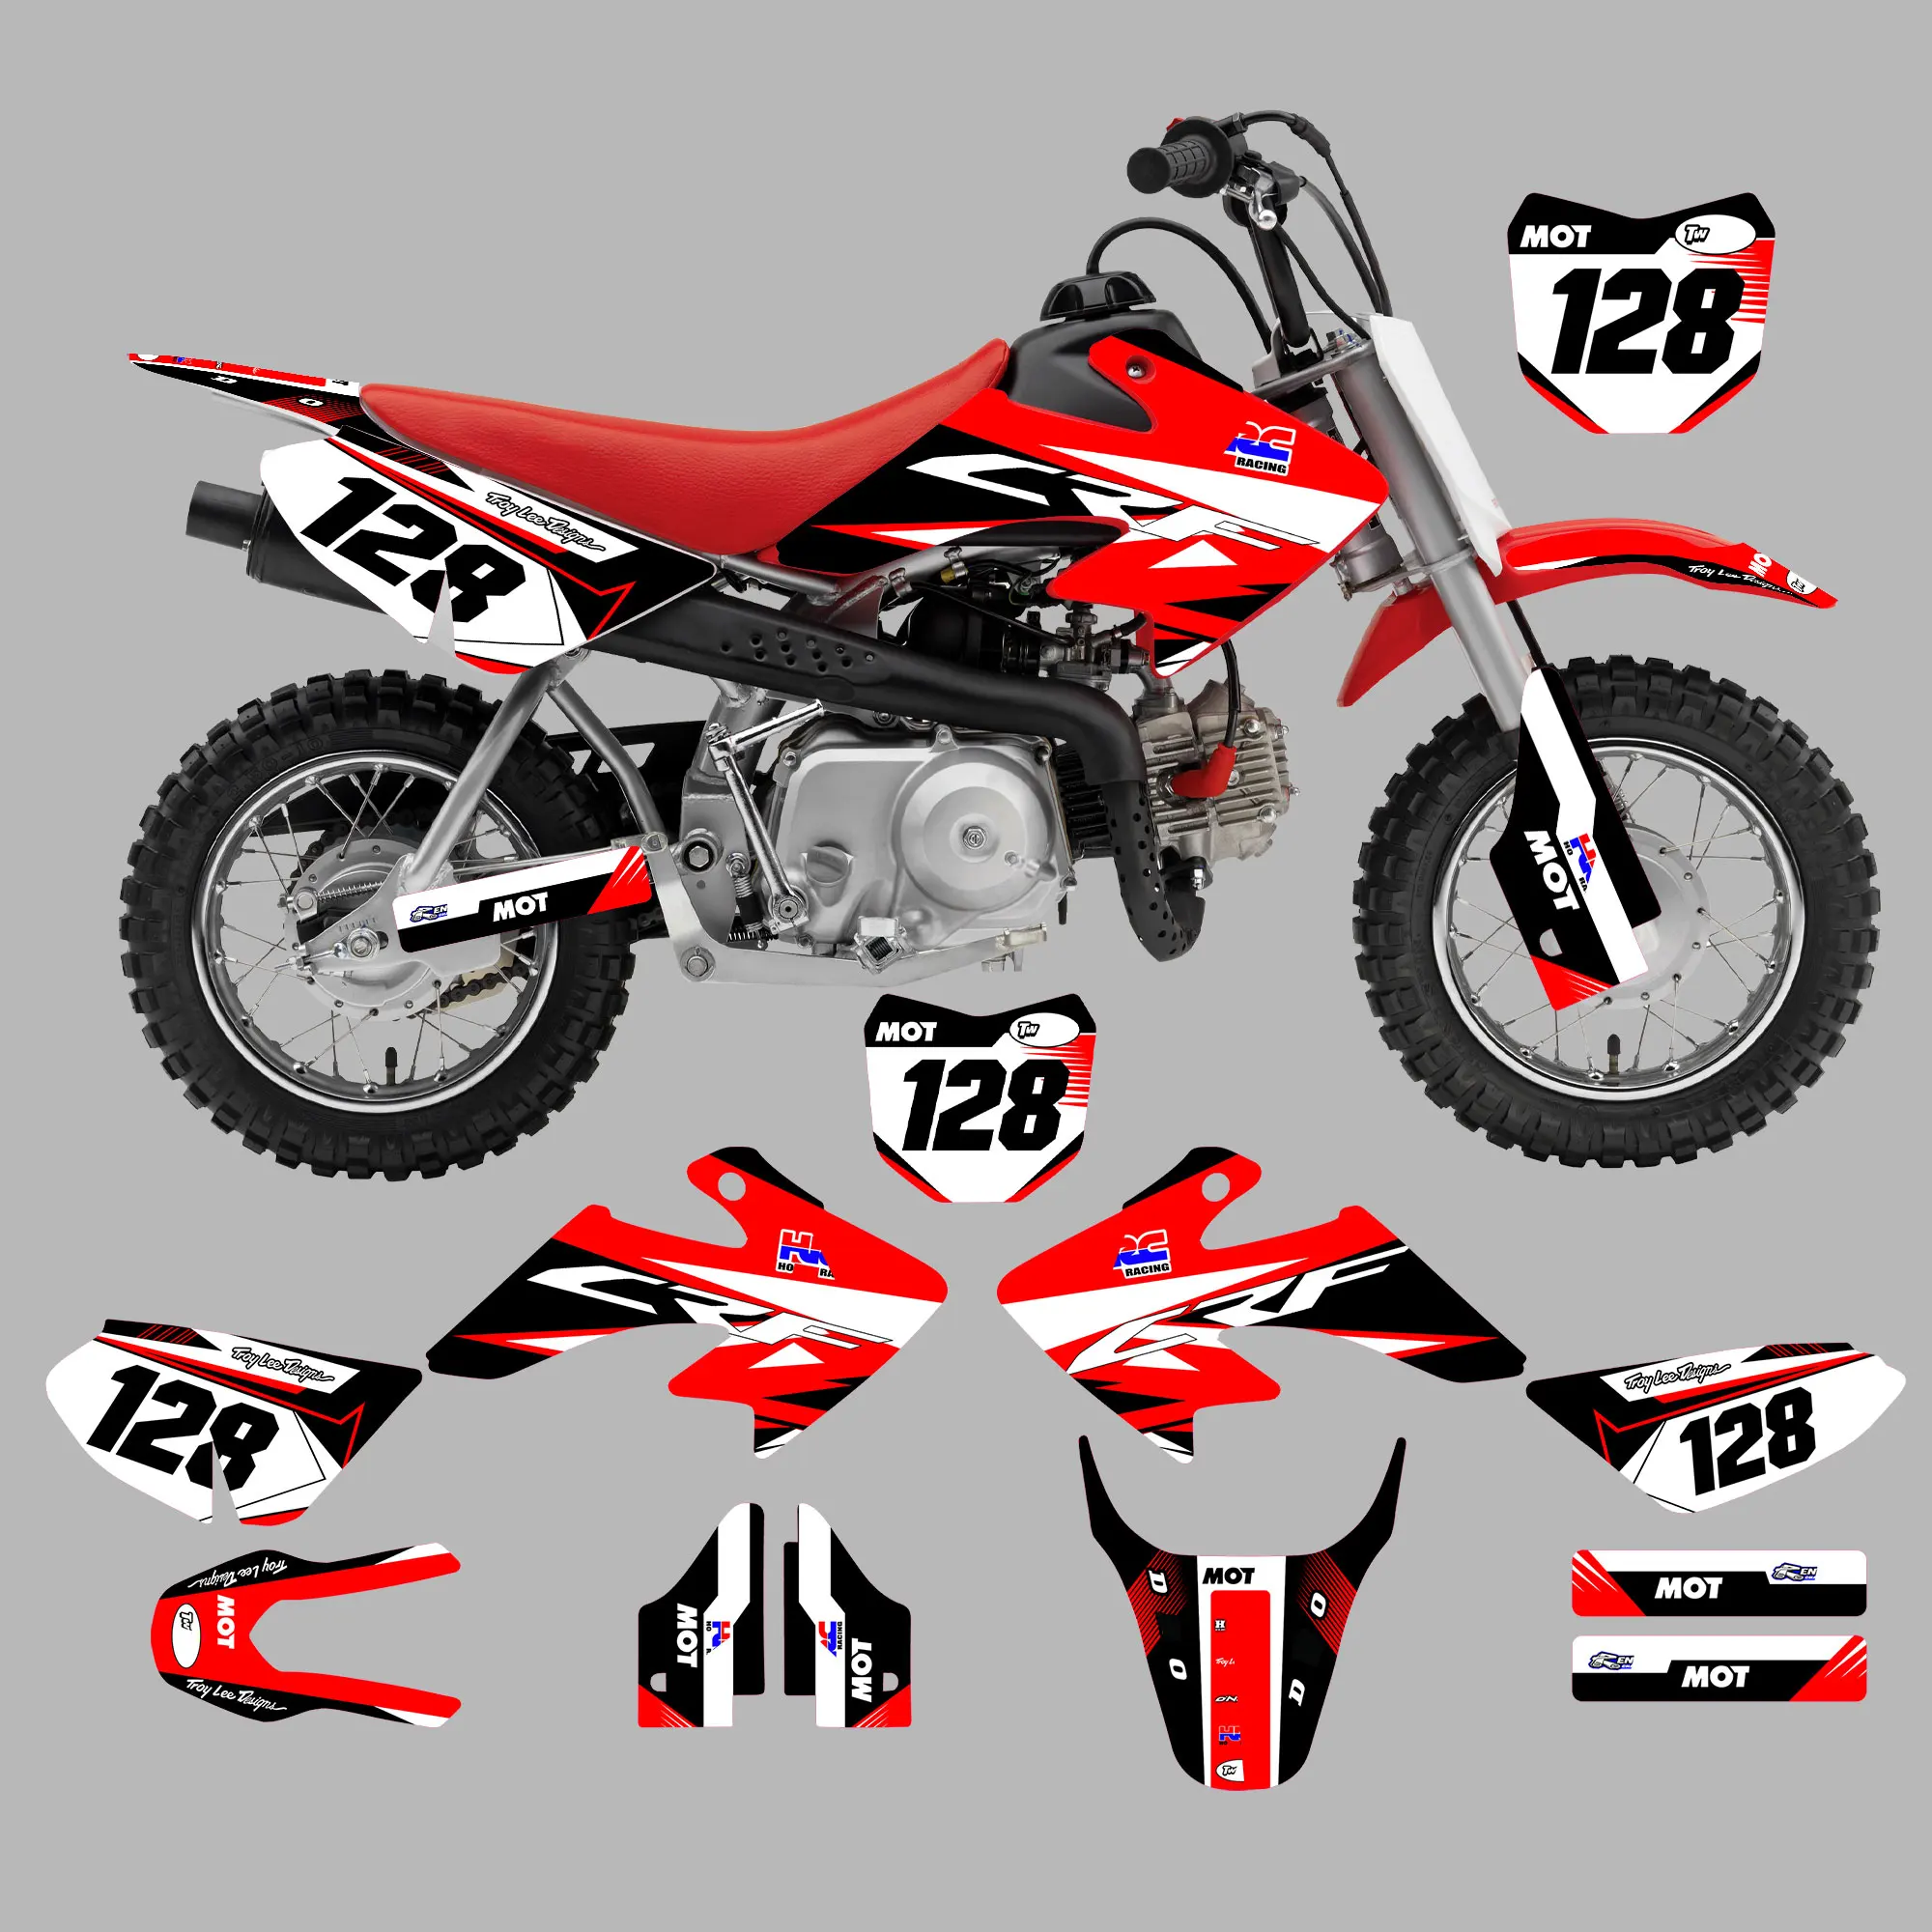 Graphic Kit for  2000-2021 CRF50  2000 01 02 03 04 05 06 07 08 09 10 11 12 13 14 15 16  17 18 19 20 2021Motocross Decals Sticker ks games 2000 piece 18 different puzzle free delivery worldwide for adults 2021 trend hıgh quality leisure home games